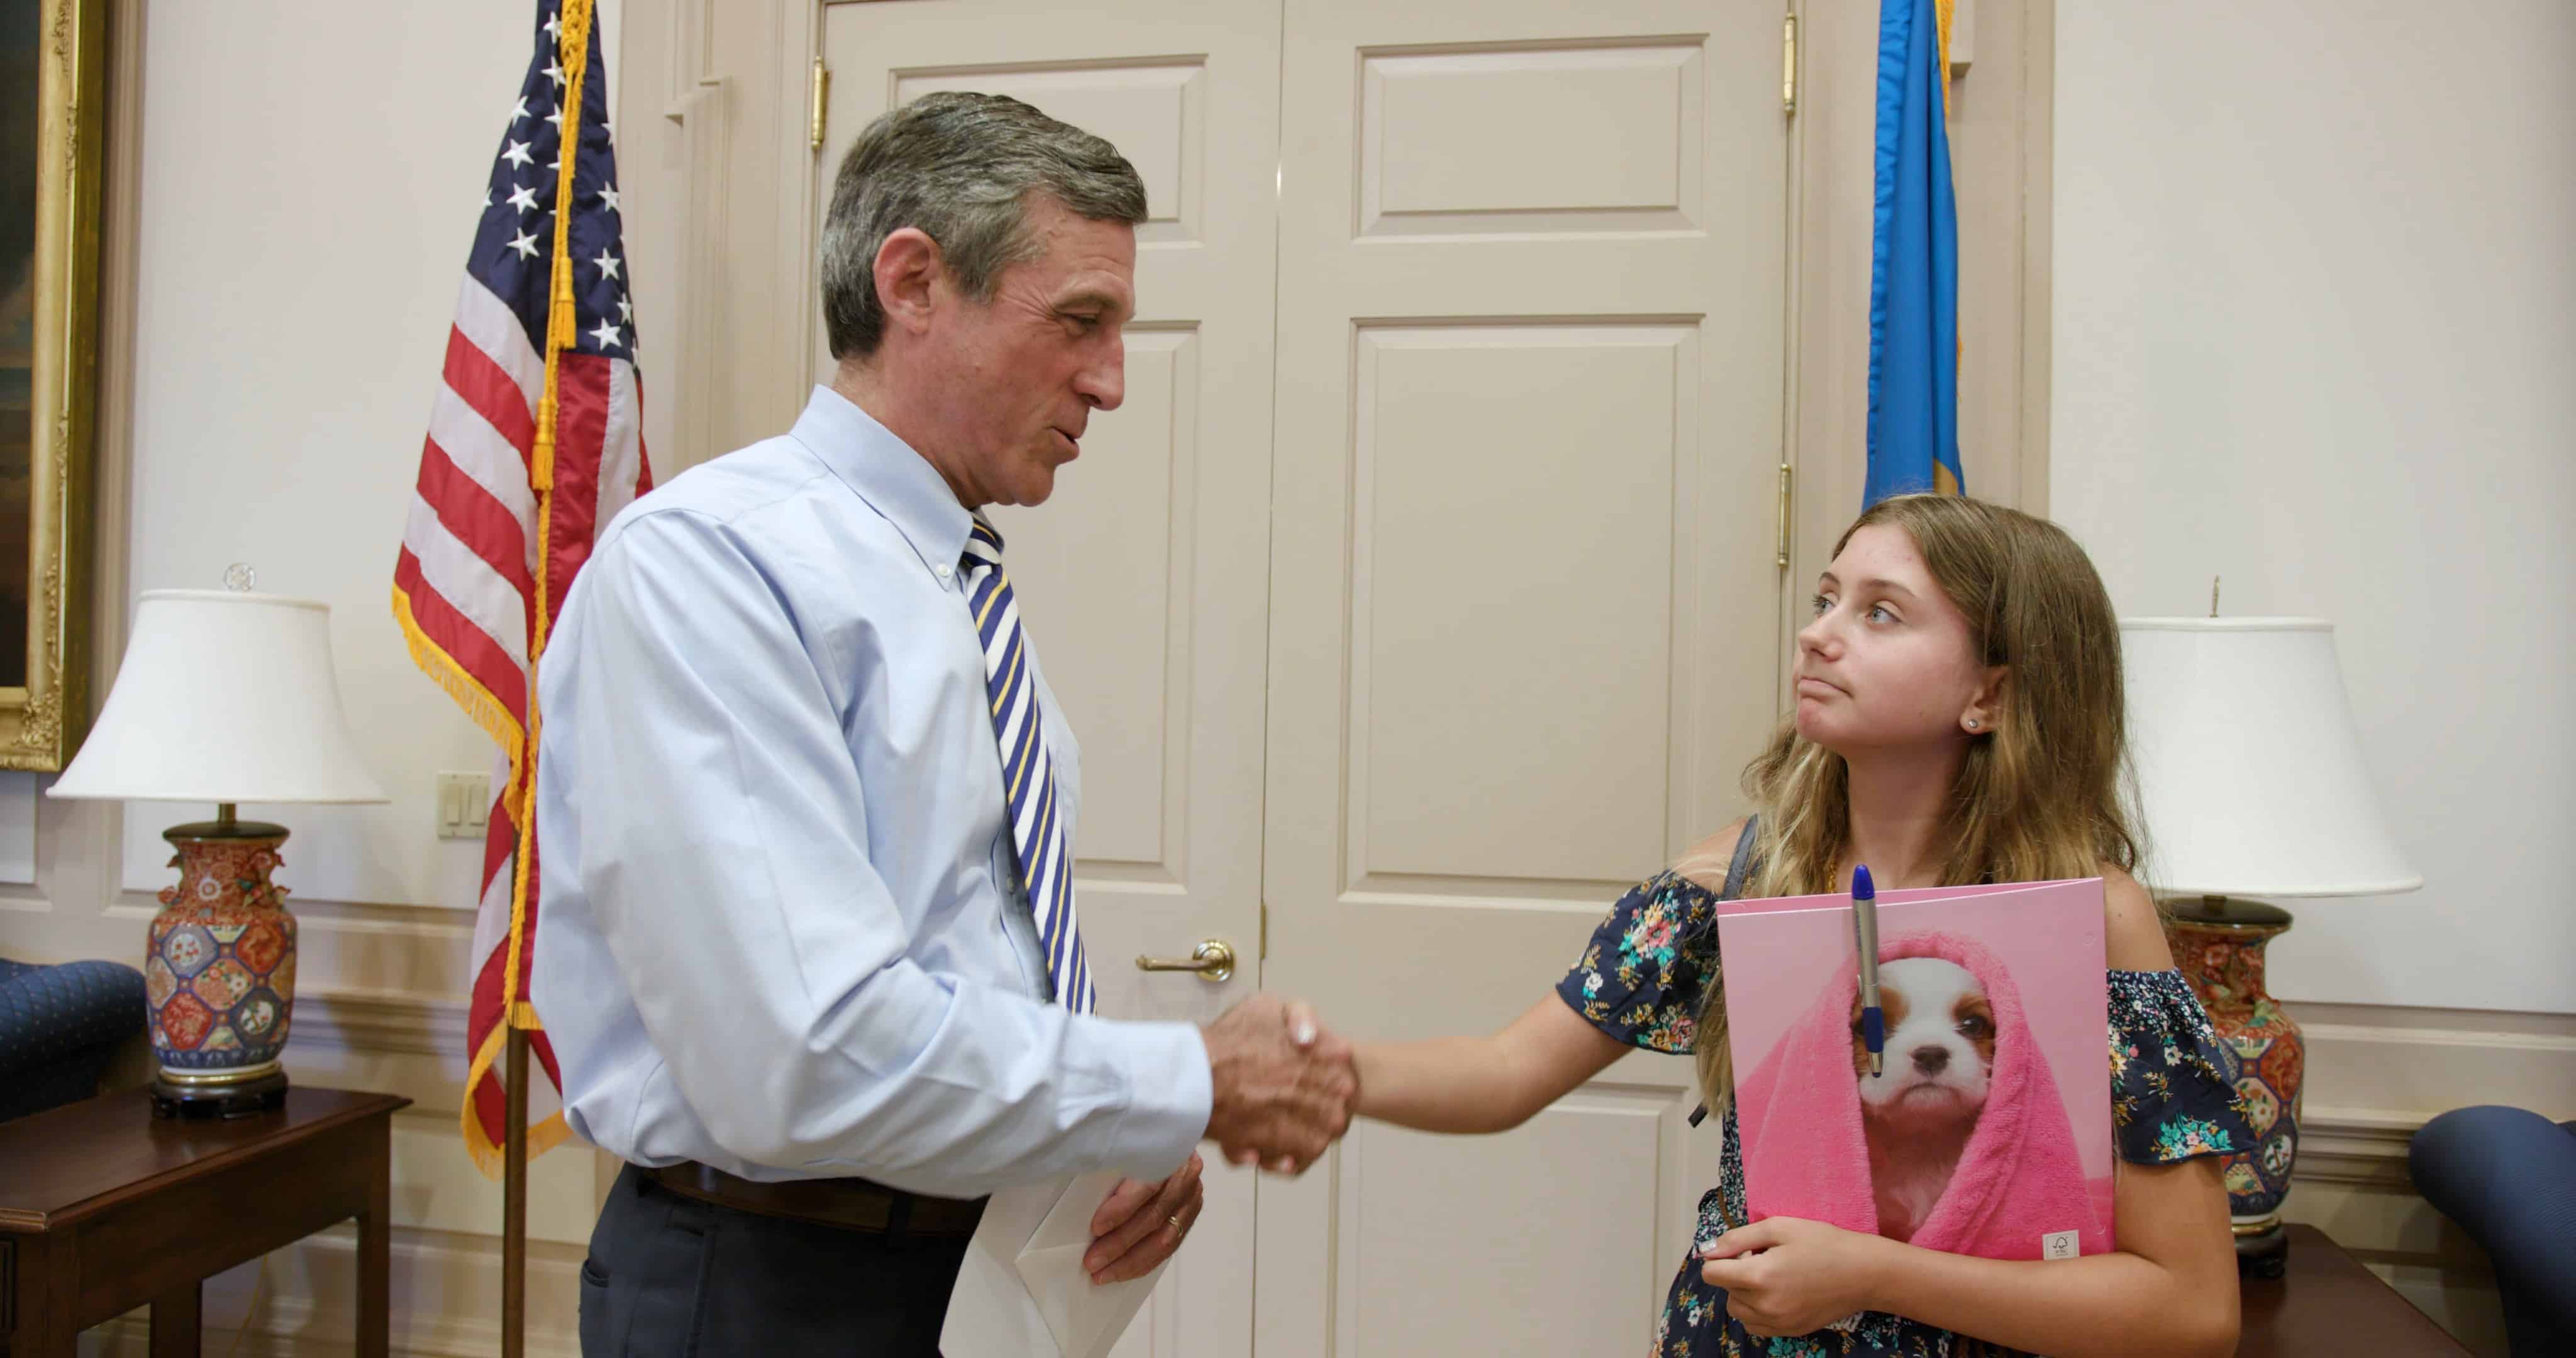 Rylie shakes hands with governor